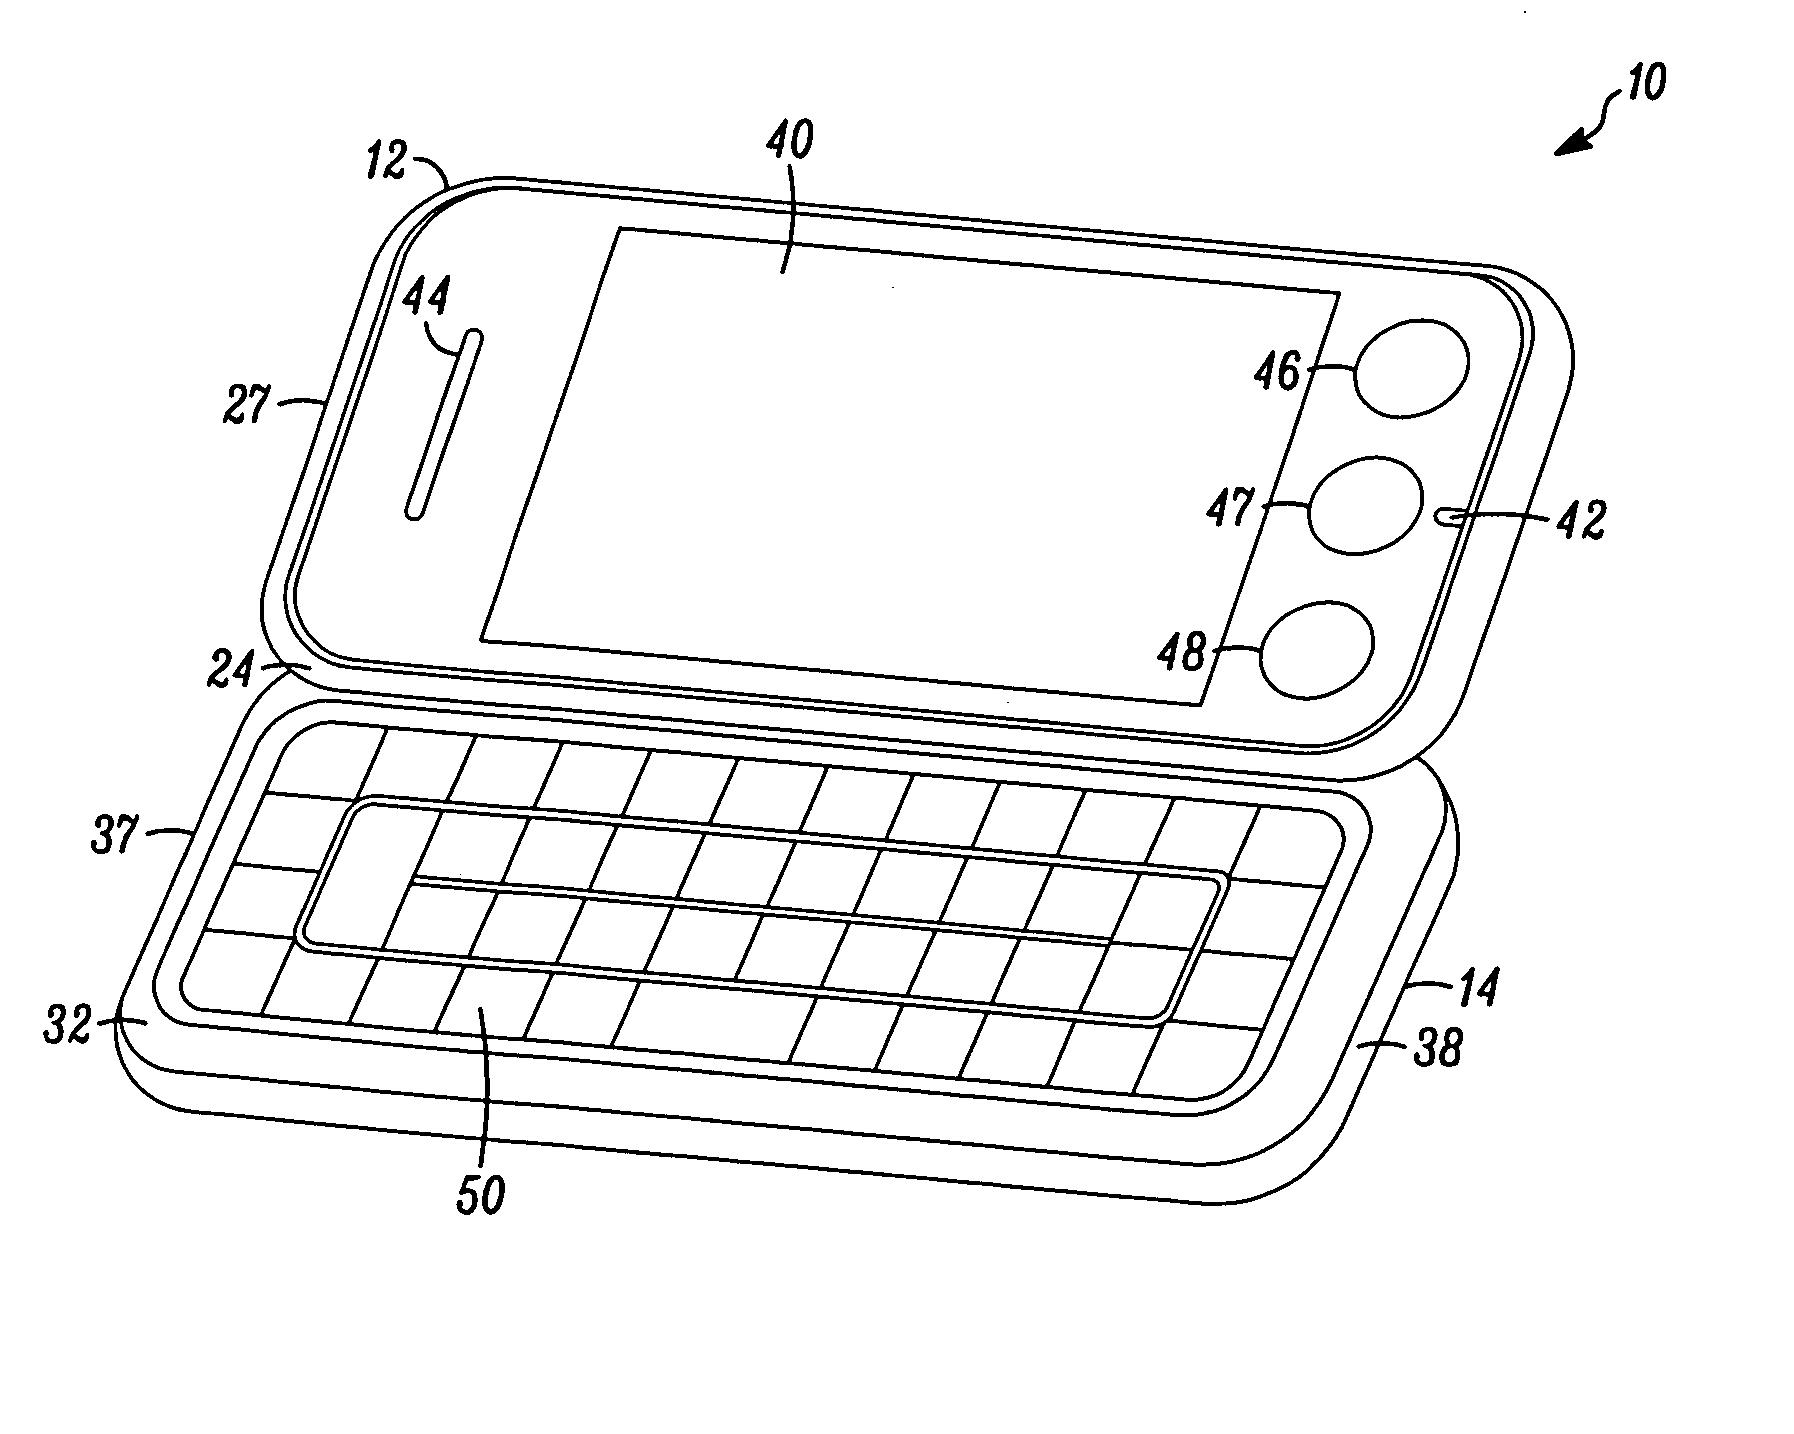 Electronic device having a clamshell configuration